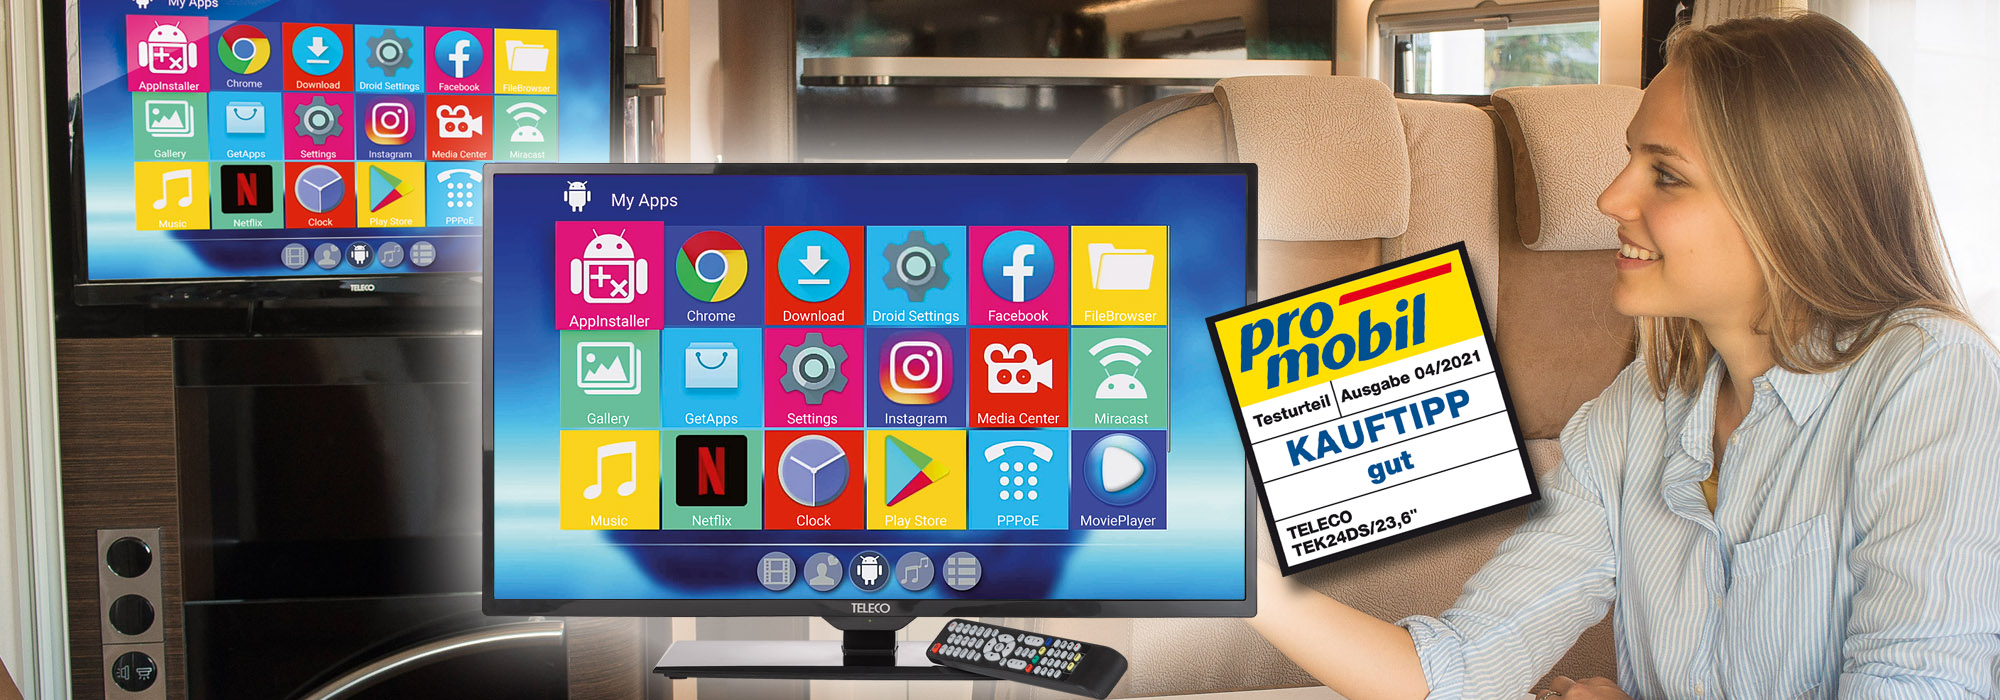 Teleco’s SMART TV wins a place on the podium in promobil tests